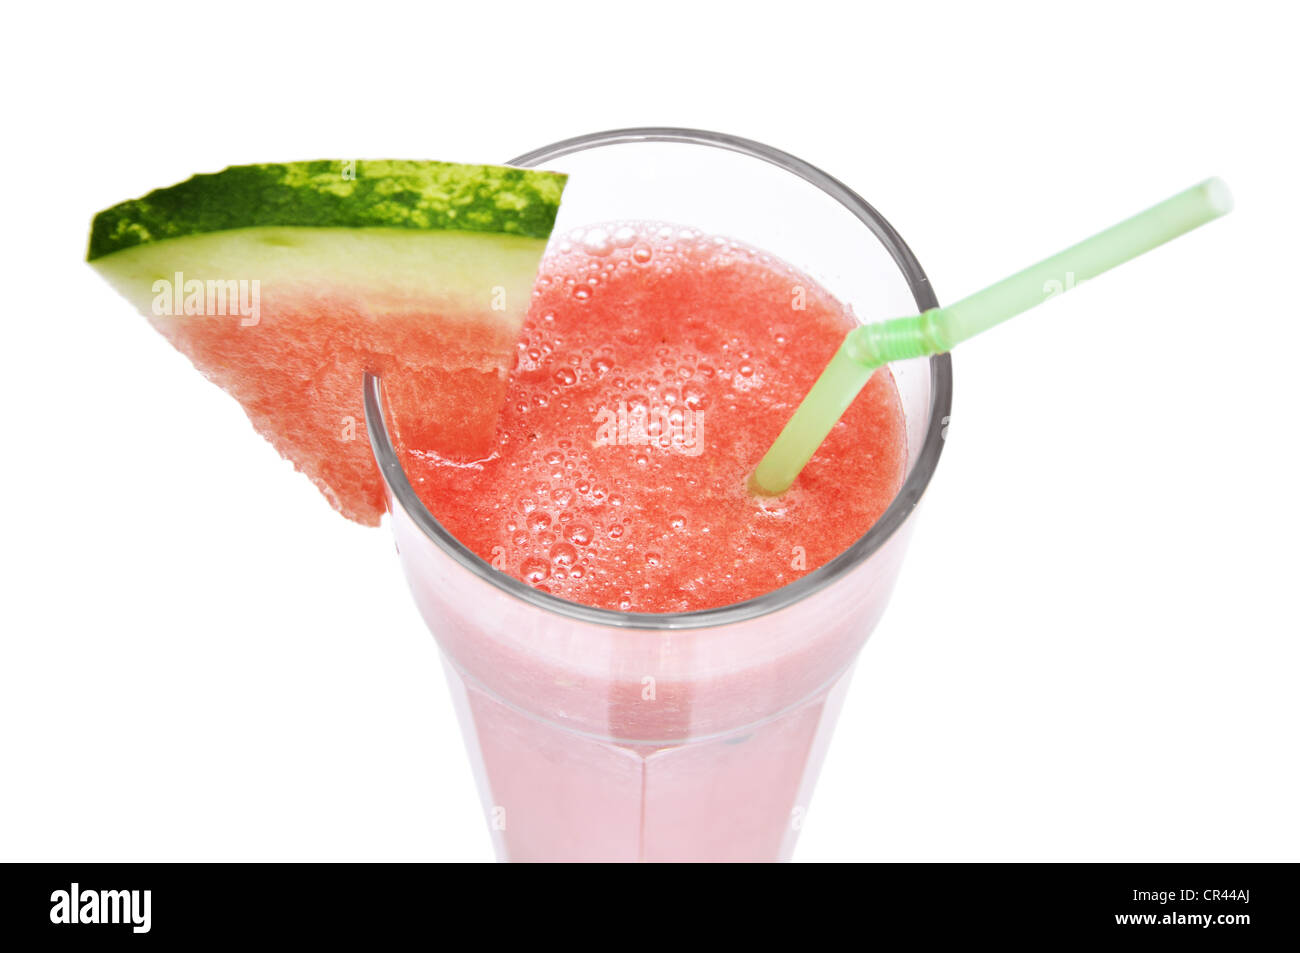 Watermelon smoothie garnished with watermelon slices close-up over white Stock Photo